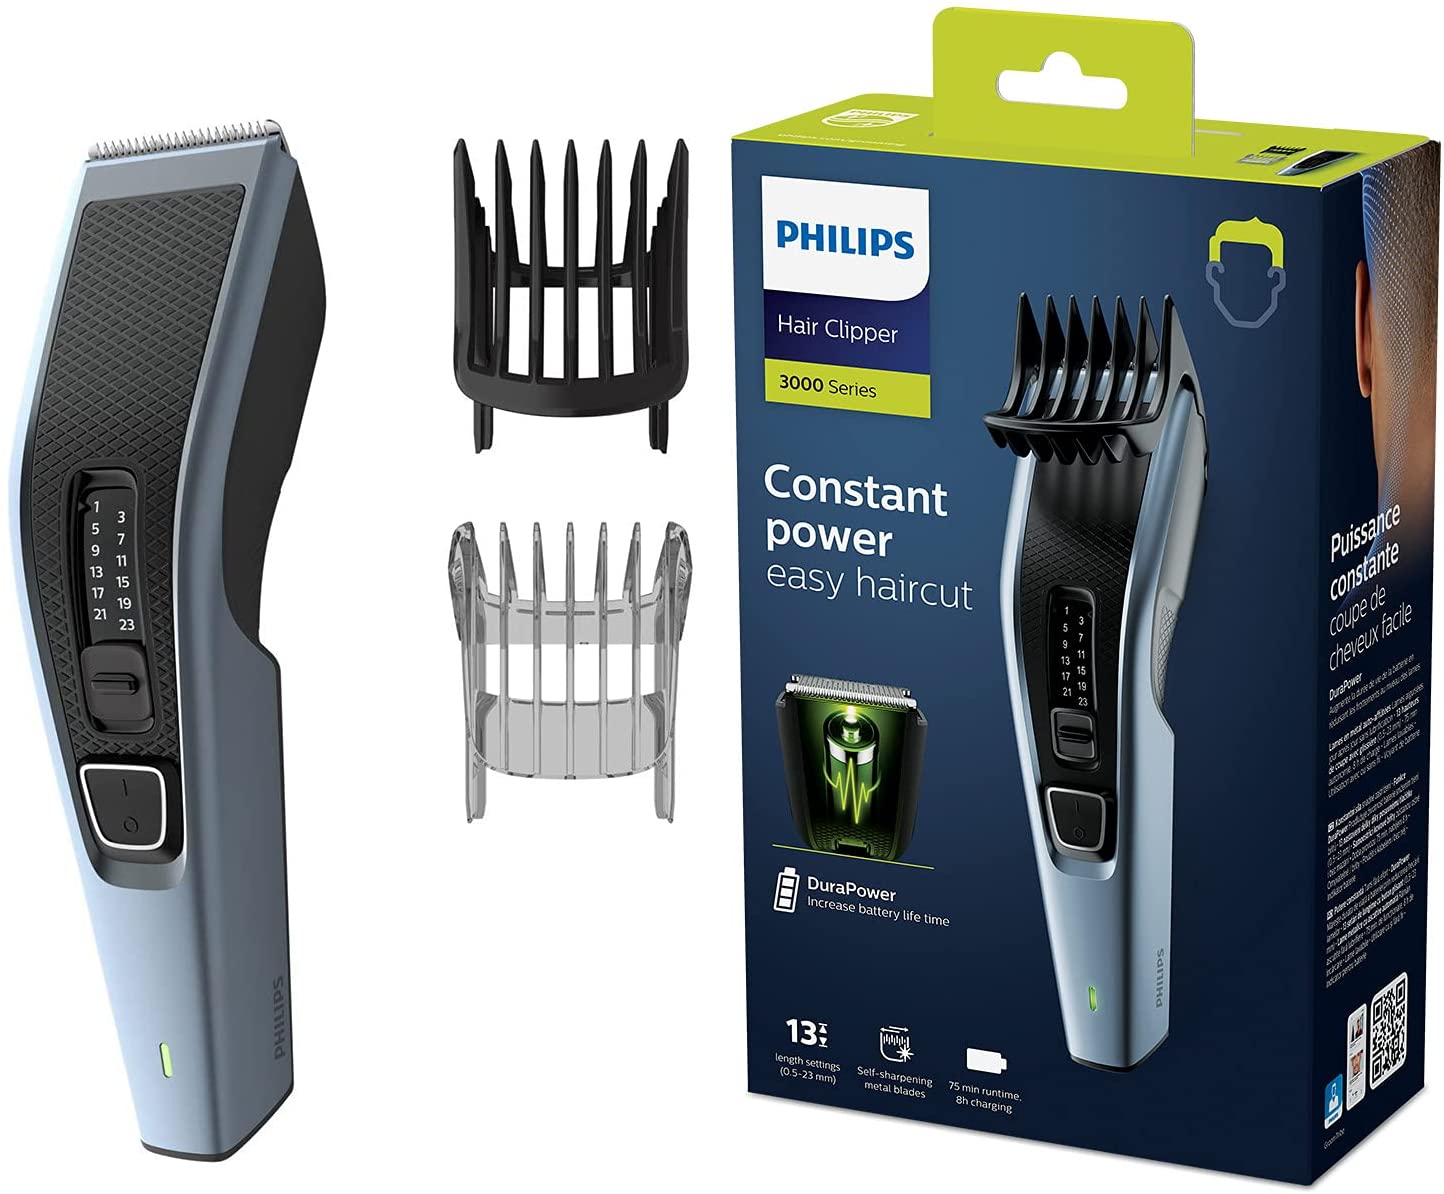 Philips HC3530/15 Hair Clipper Series 3000 with stainless steel blades (13 lengths, trim attachment) Mains & battery operation.